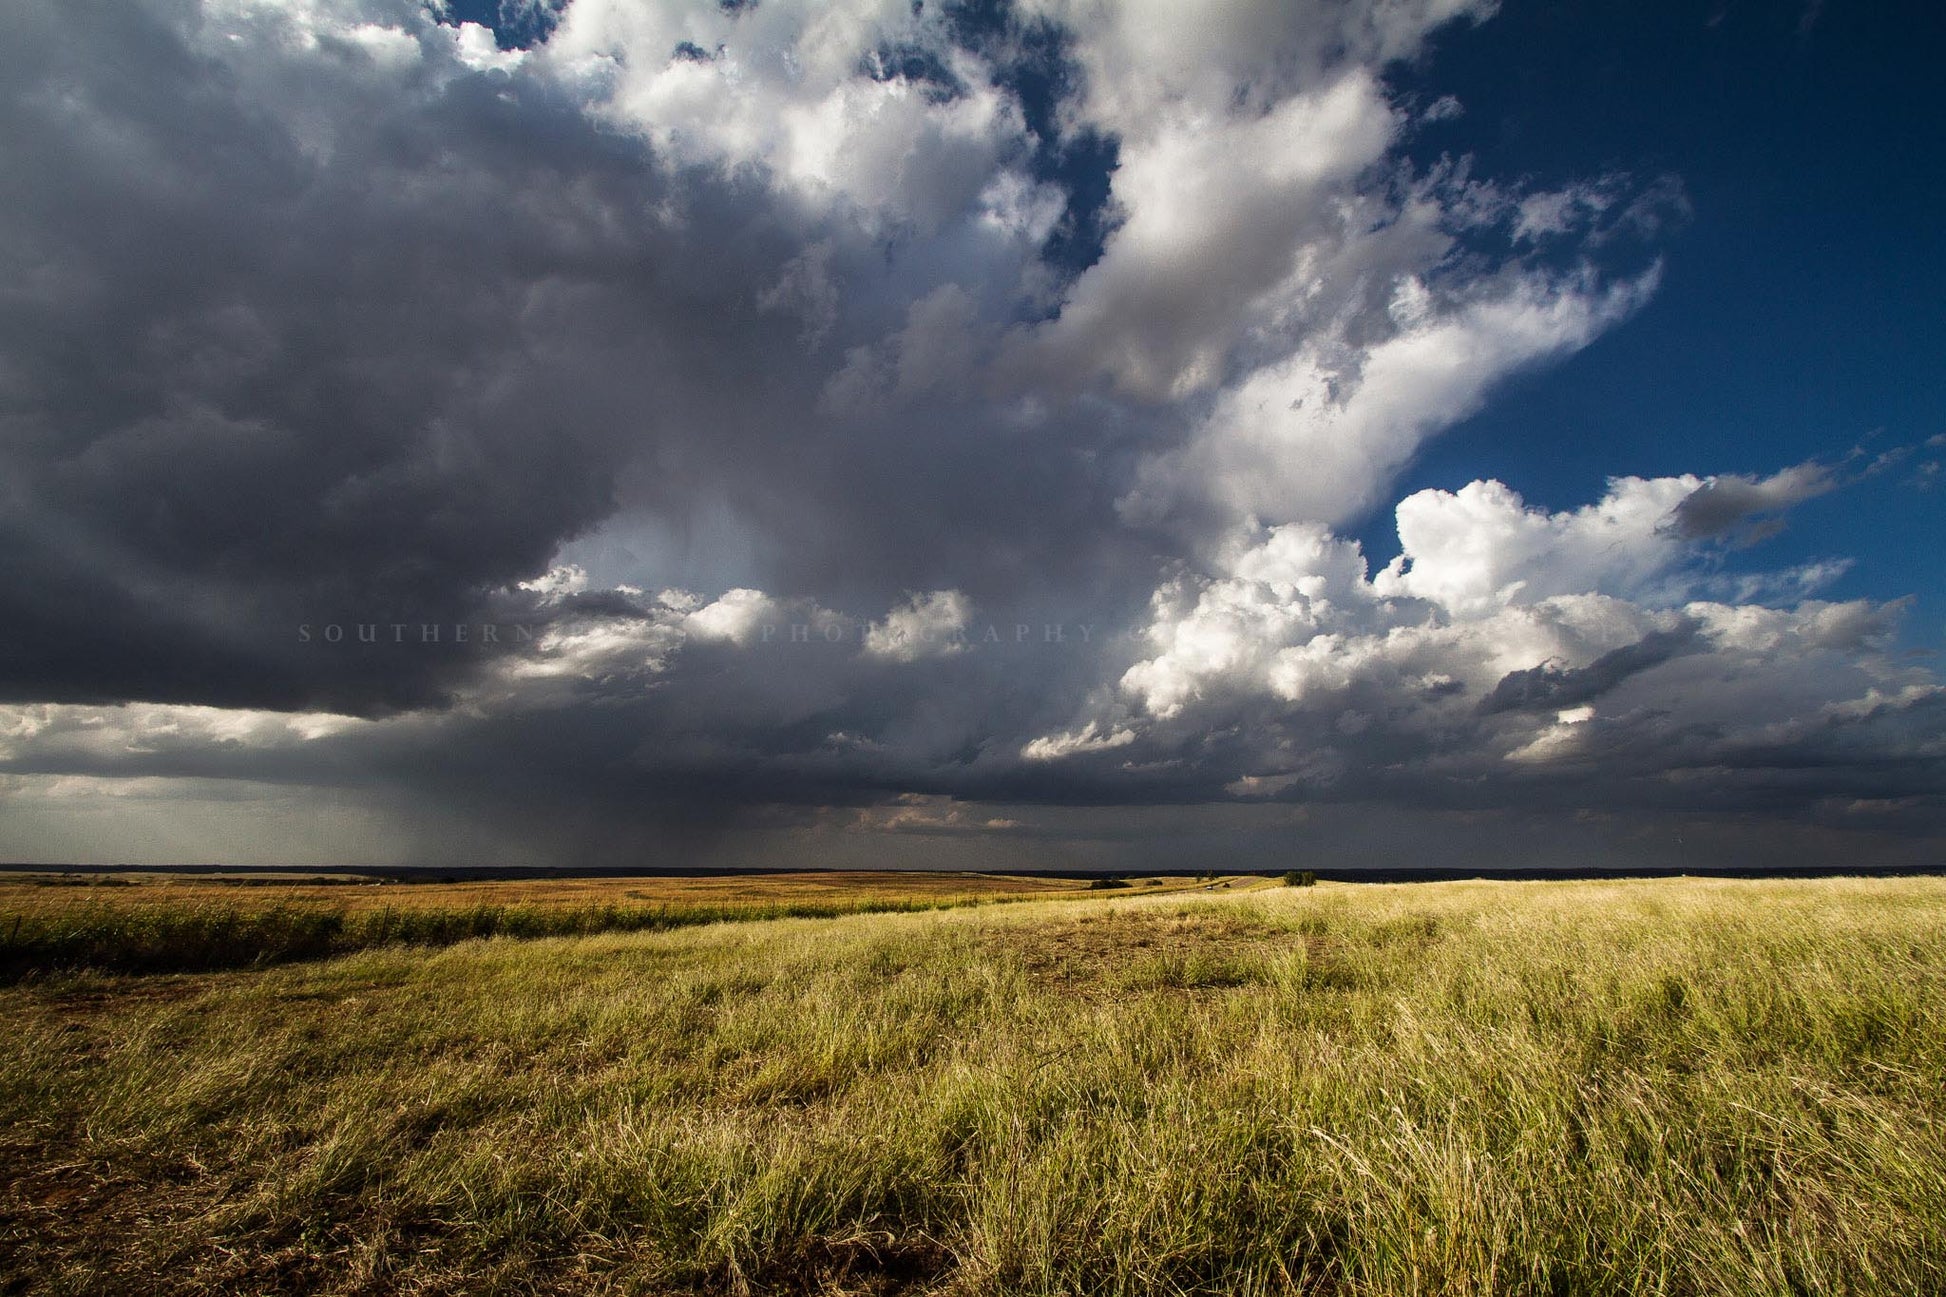 Great plains photography print of storm clouds building over golden prairie bringing the anticipation of a stormy day in Oklahoma by Sean Ramsey of Southern Plains Photography.